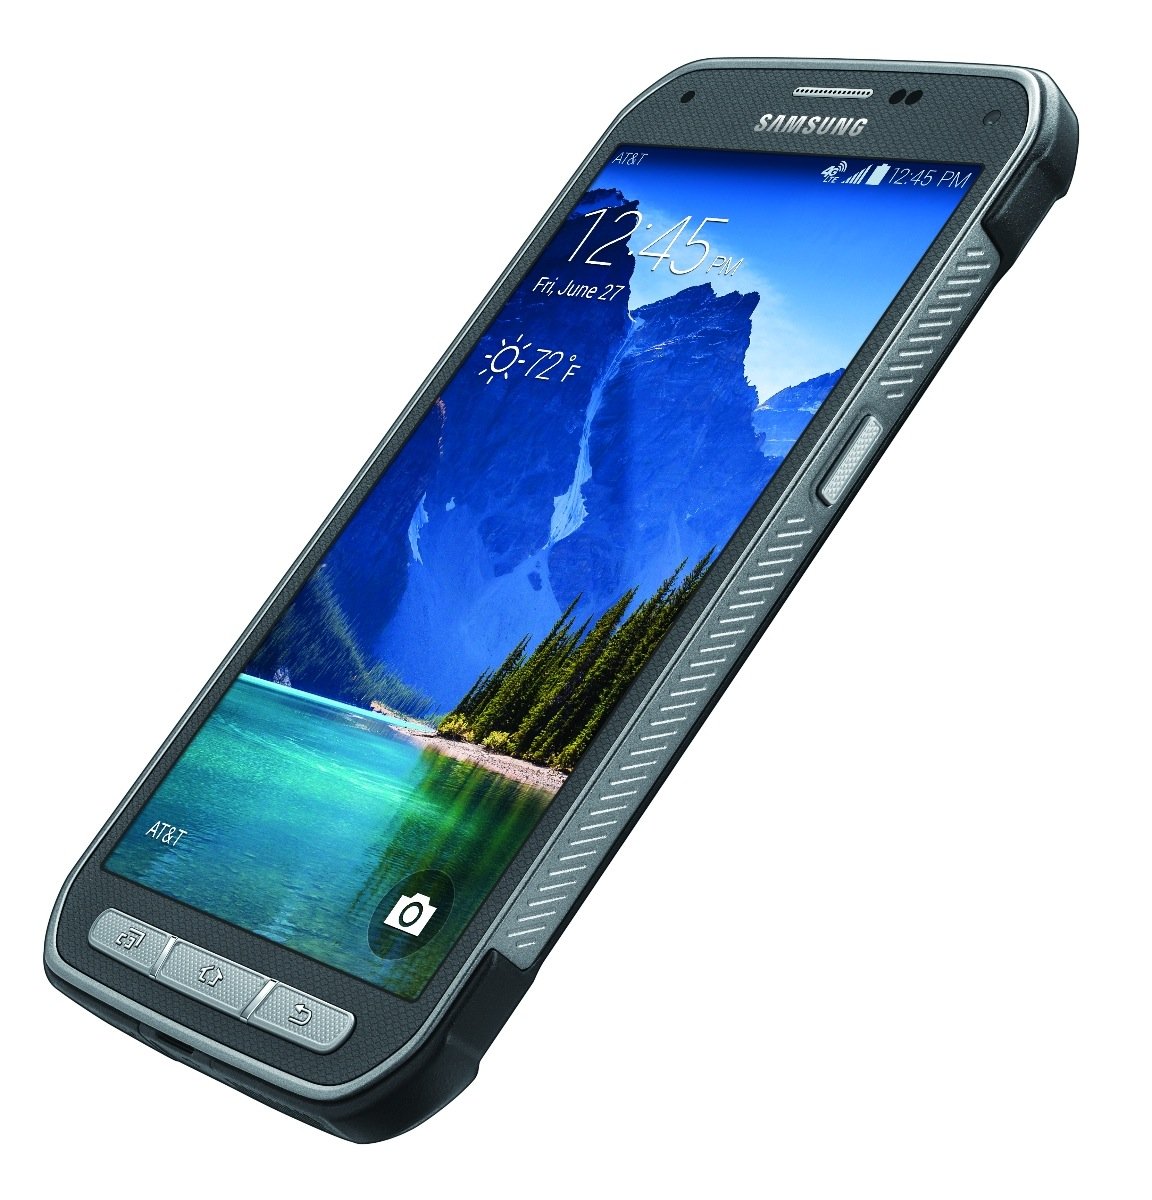 Samsung Galaxy S5 Active specs, review, release date - PhonesData